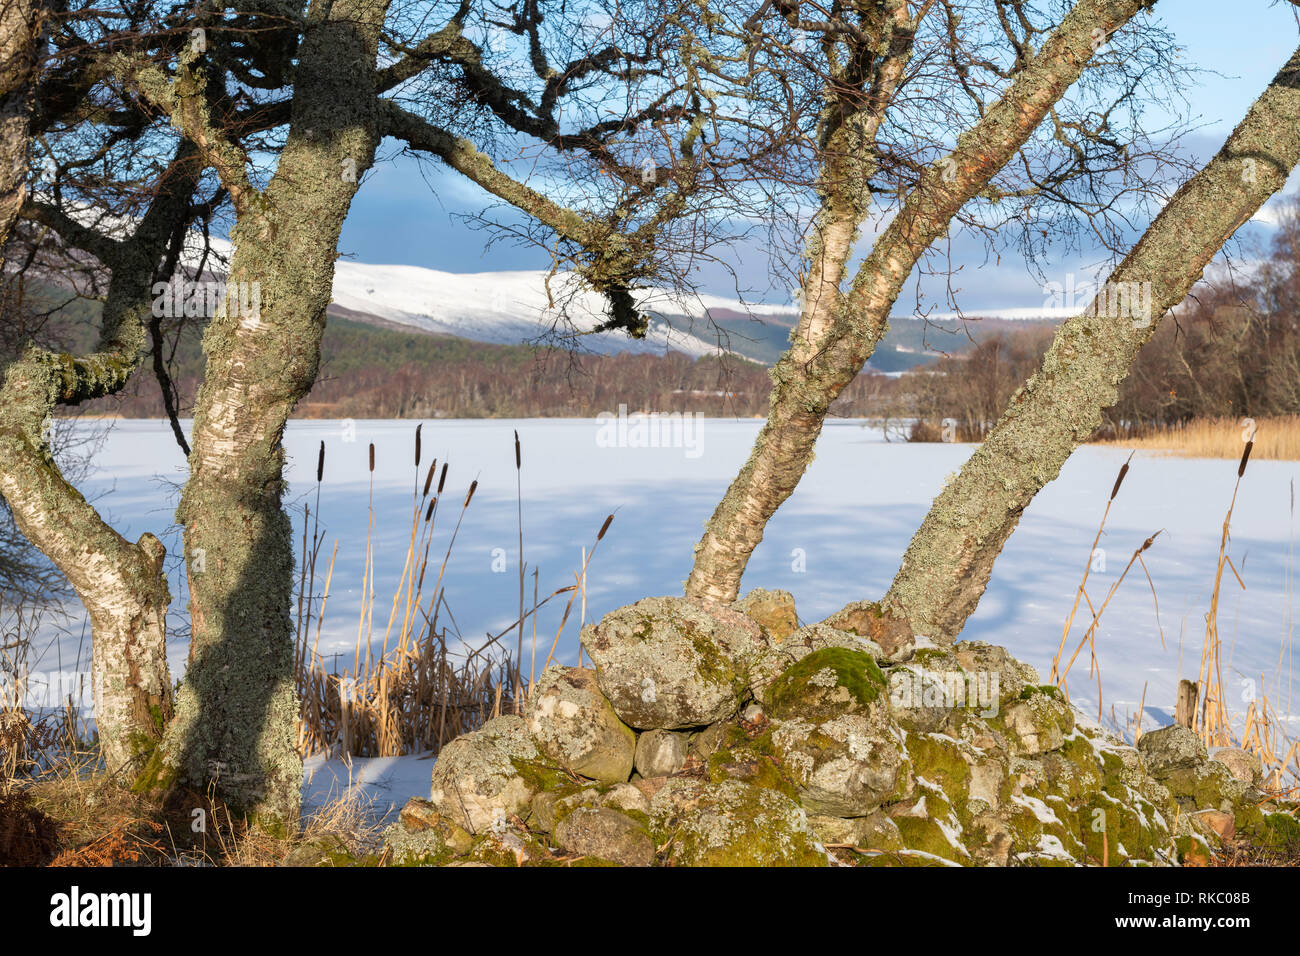 Bulrushes and Silver Birch on the Banks of a Frozen Loch Kinnord at Sunrise Stock Photo